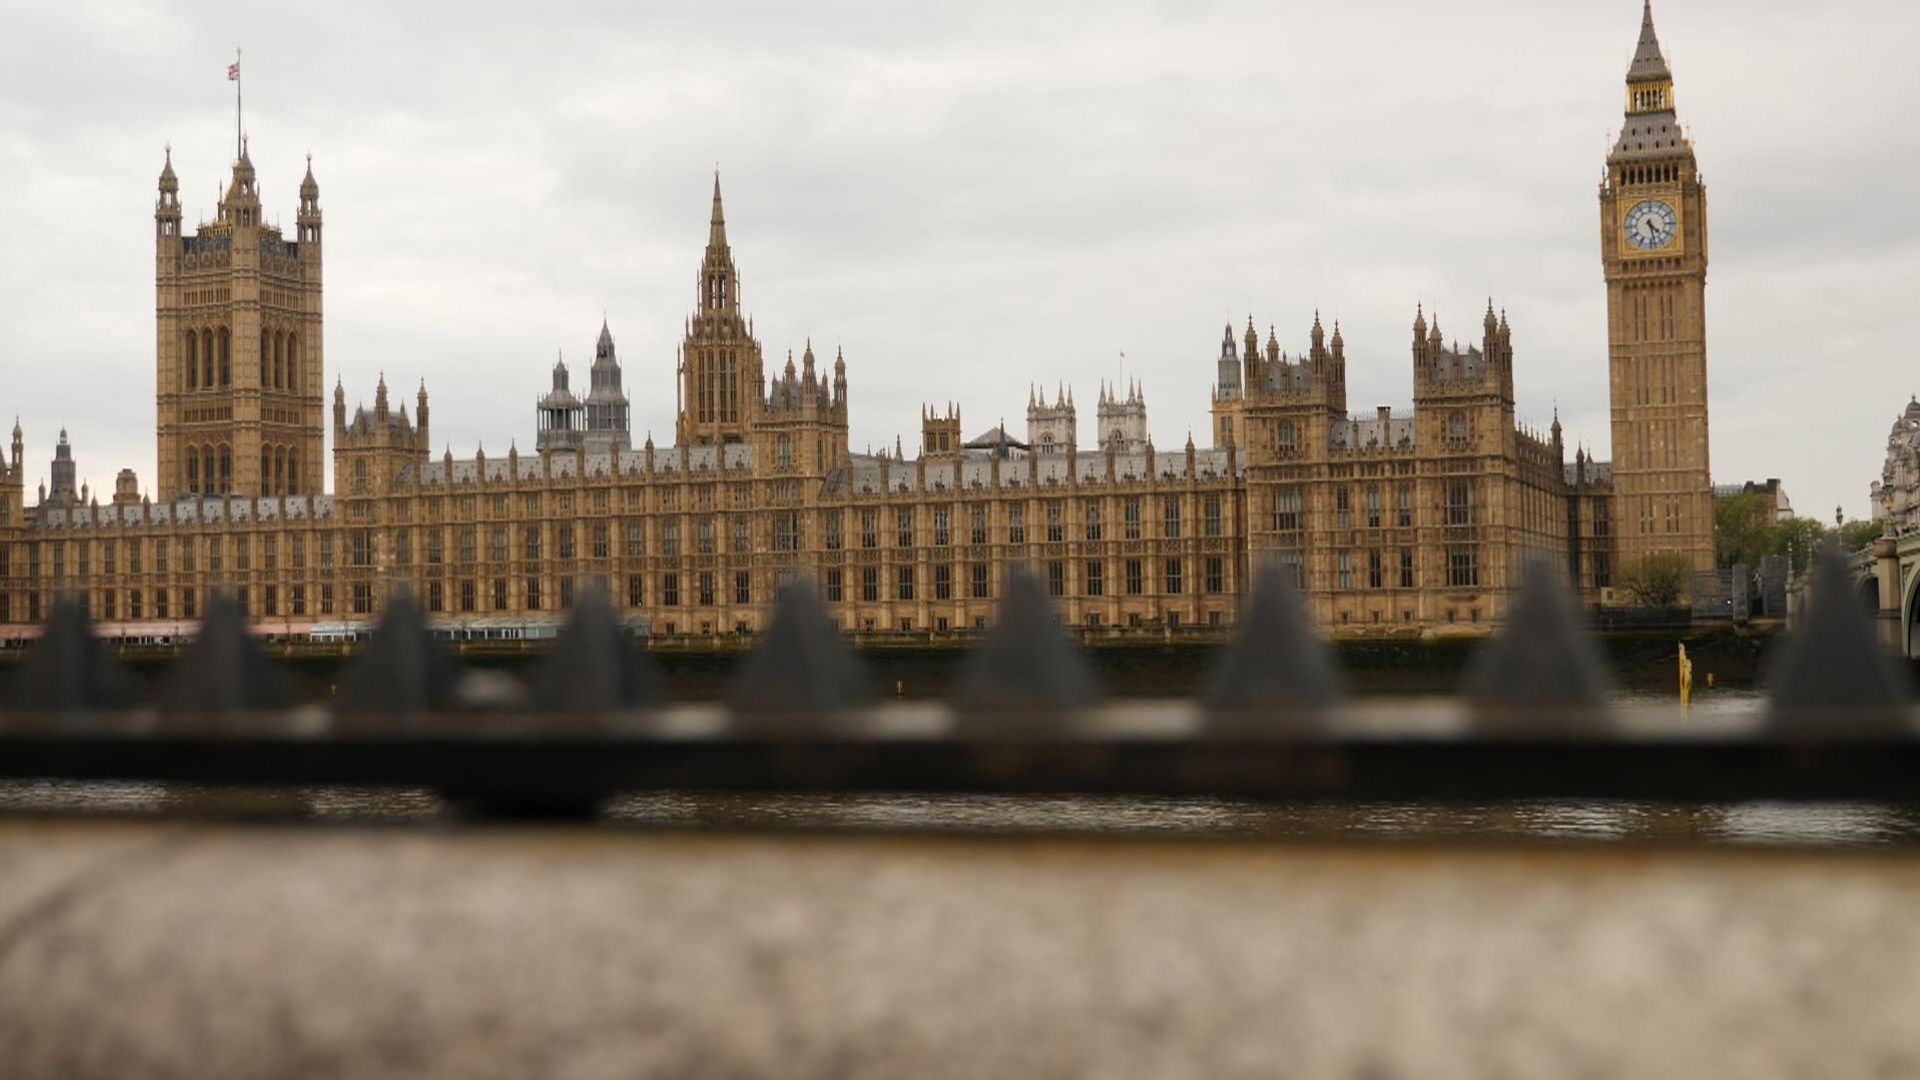 Commons approves plans to exclude from parliament MPs arrested on suspicion of serious offence...